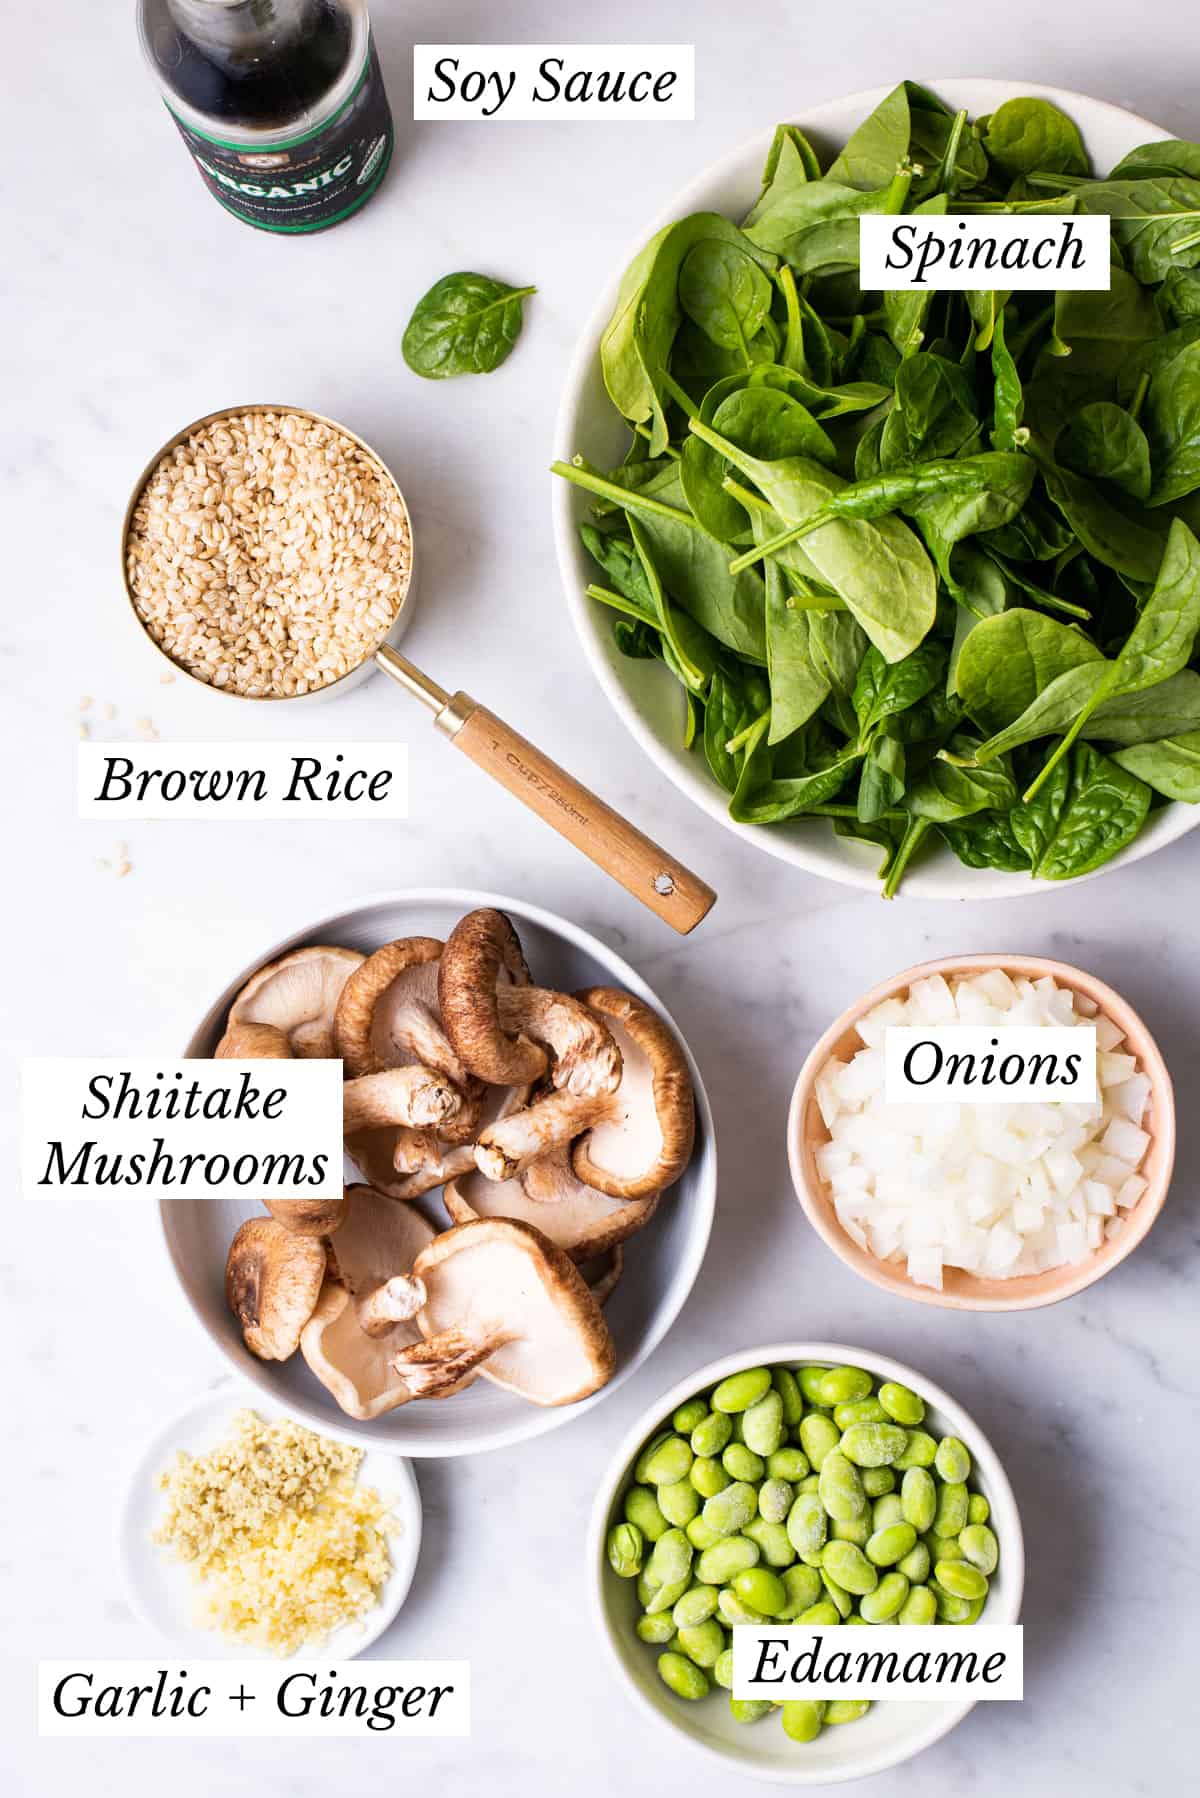 Ingredients gathered to make vegan congee with vegetables.